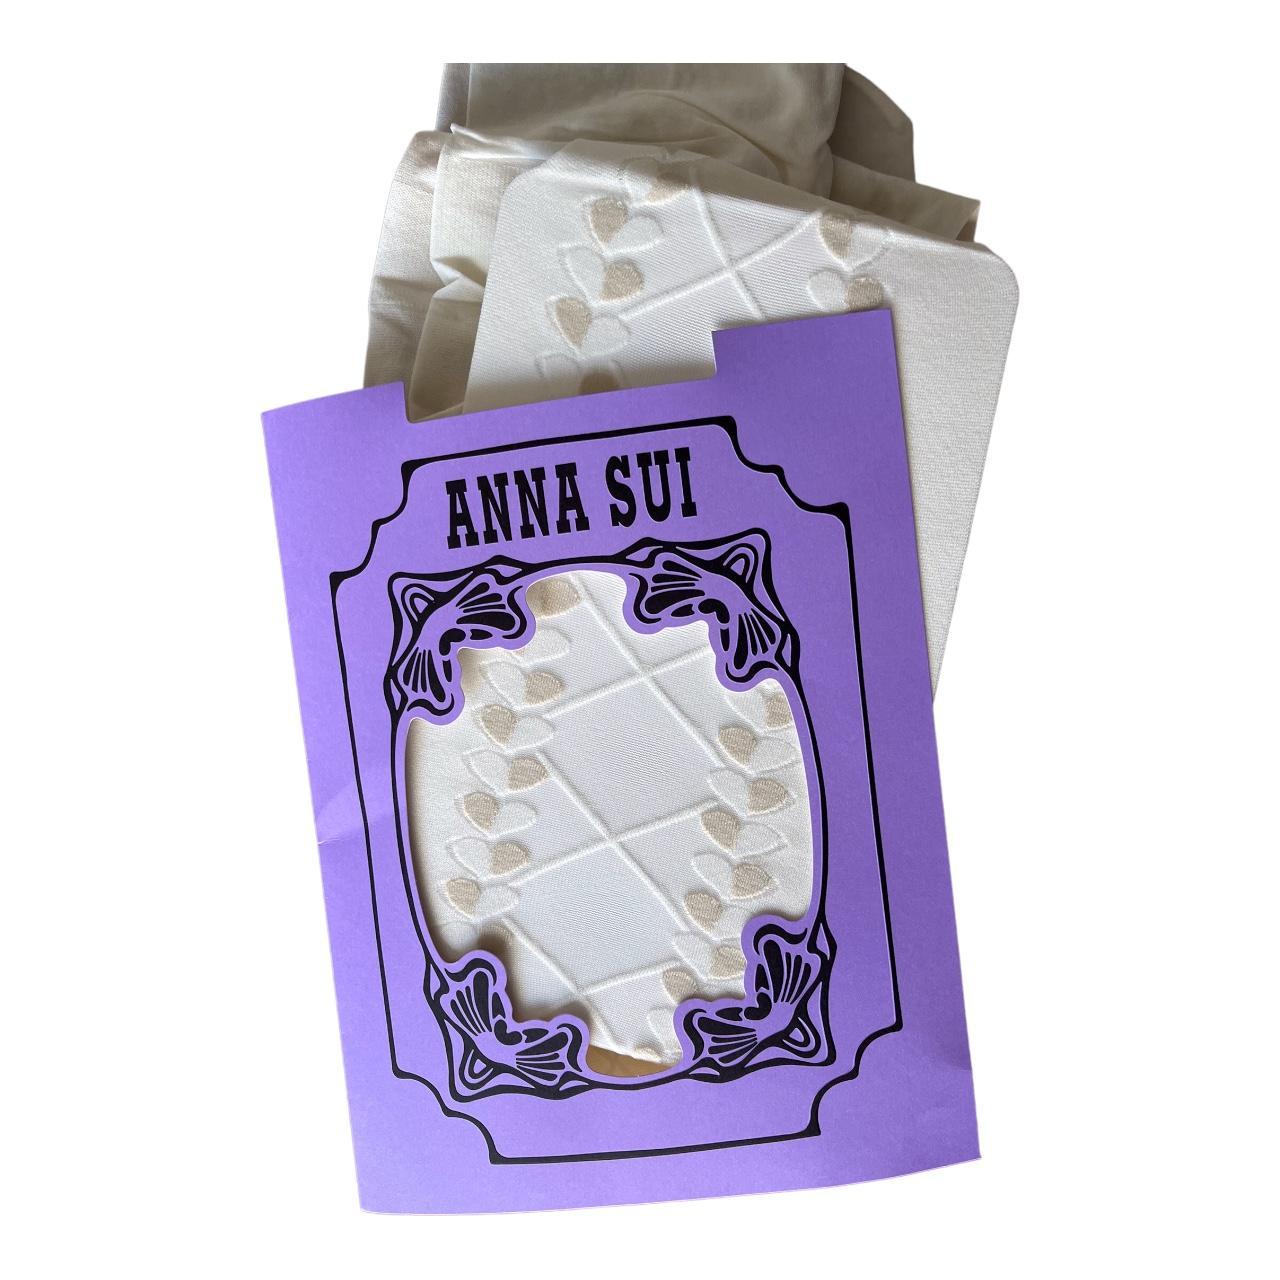 Anna Sui Women's White and Cream Hosiery-tights (4)